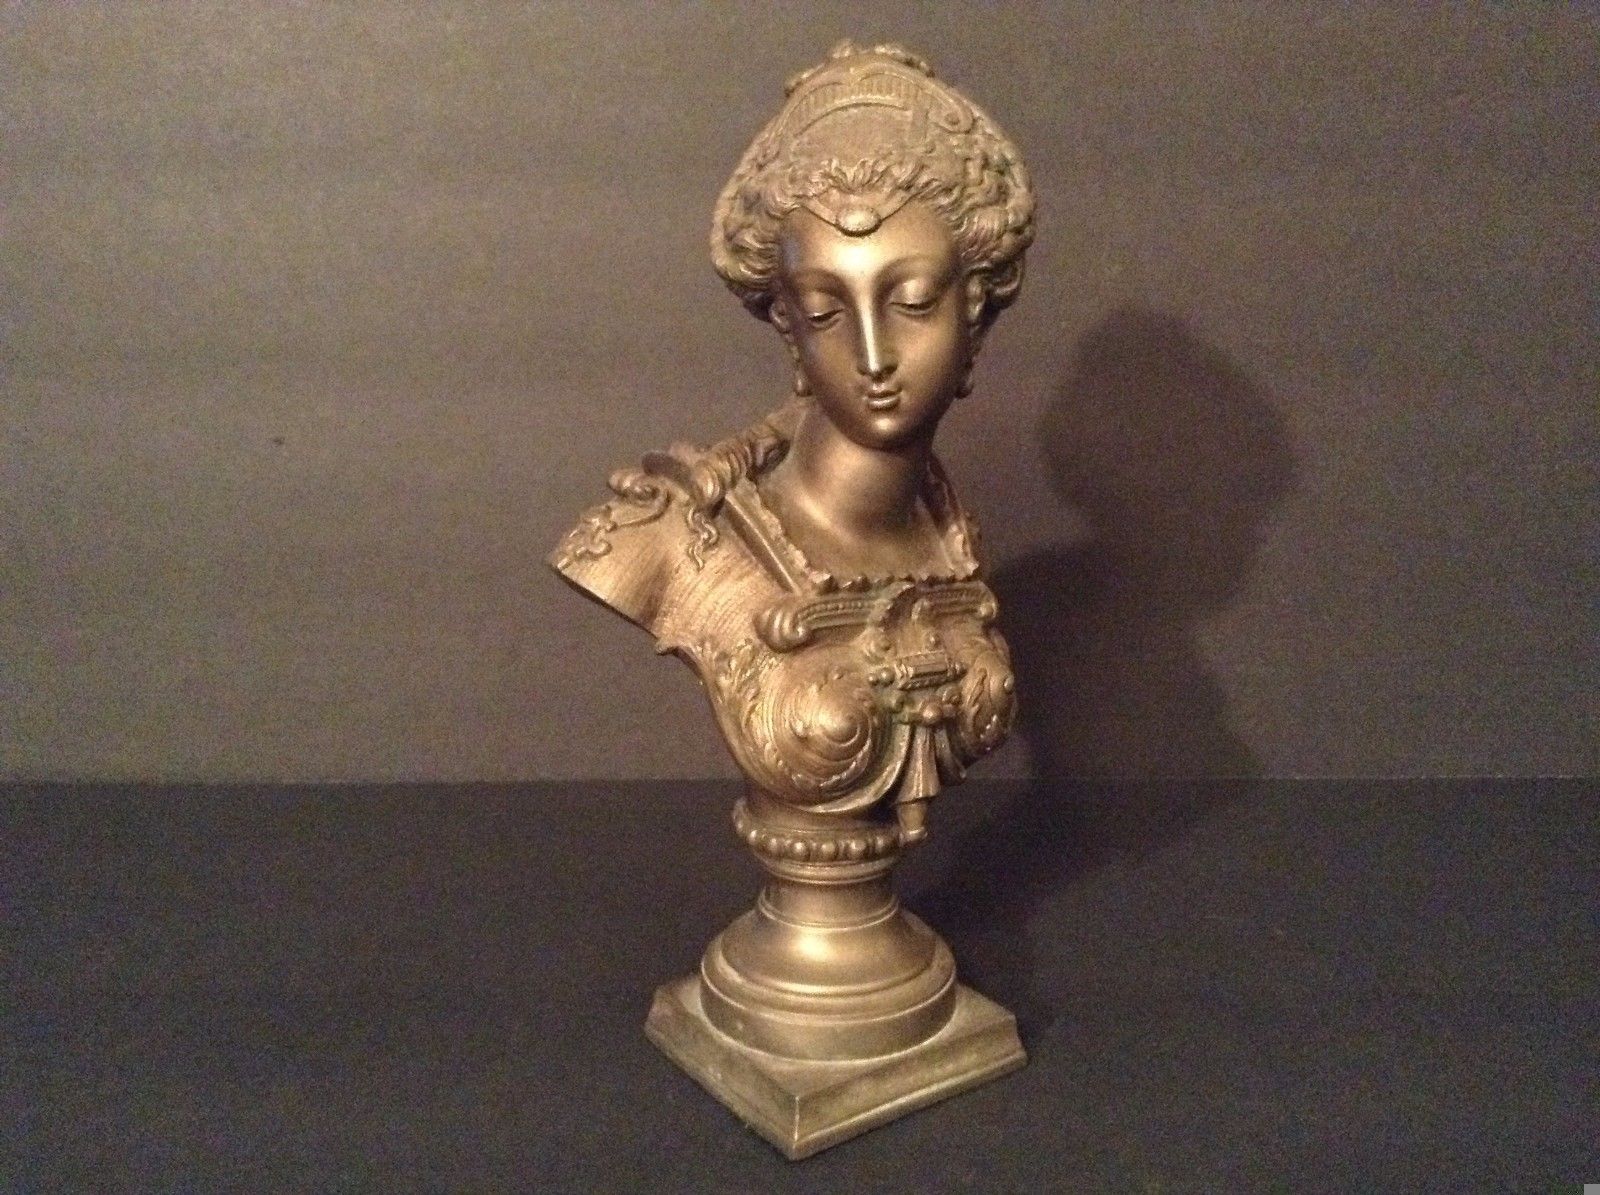 EUROPEAN BRONZE/ BRONZE-LIKE BUST OF A YOUNG WOMAN.